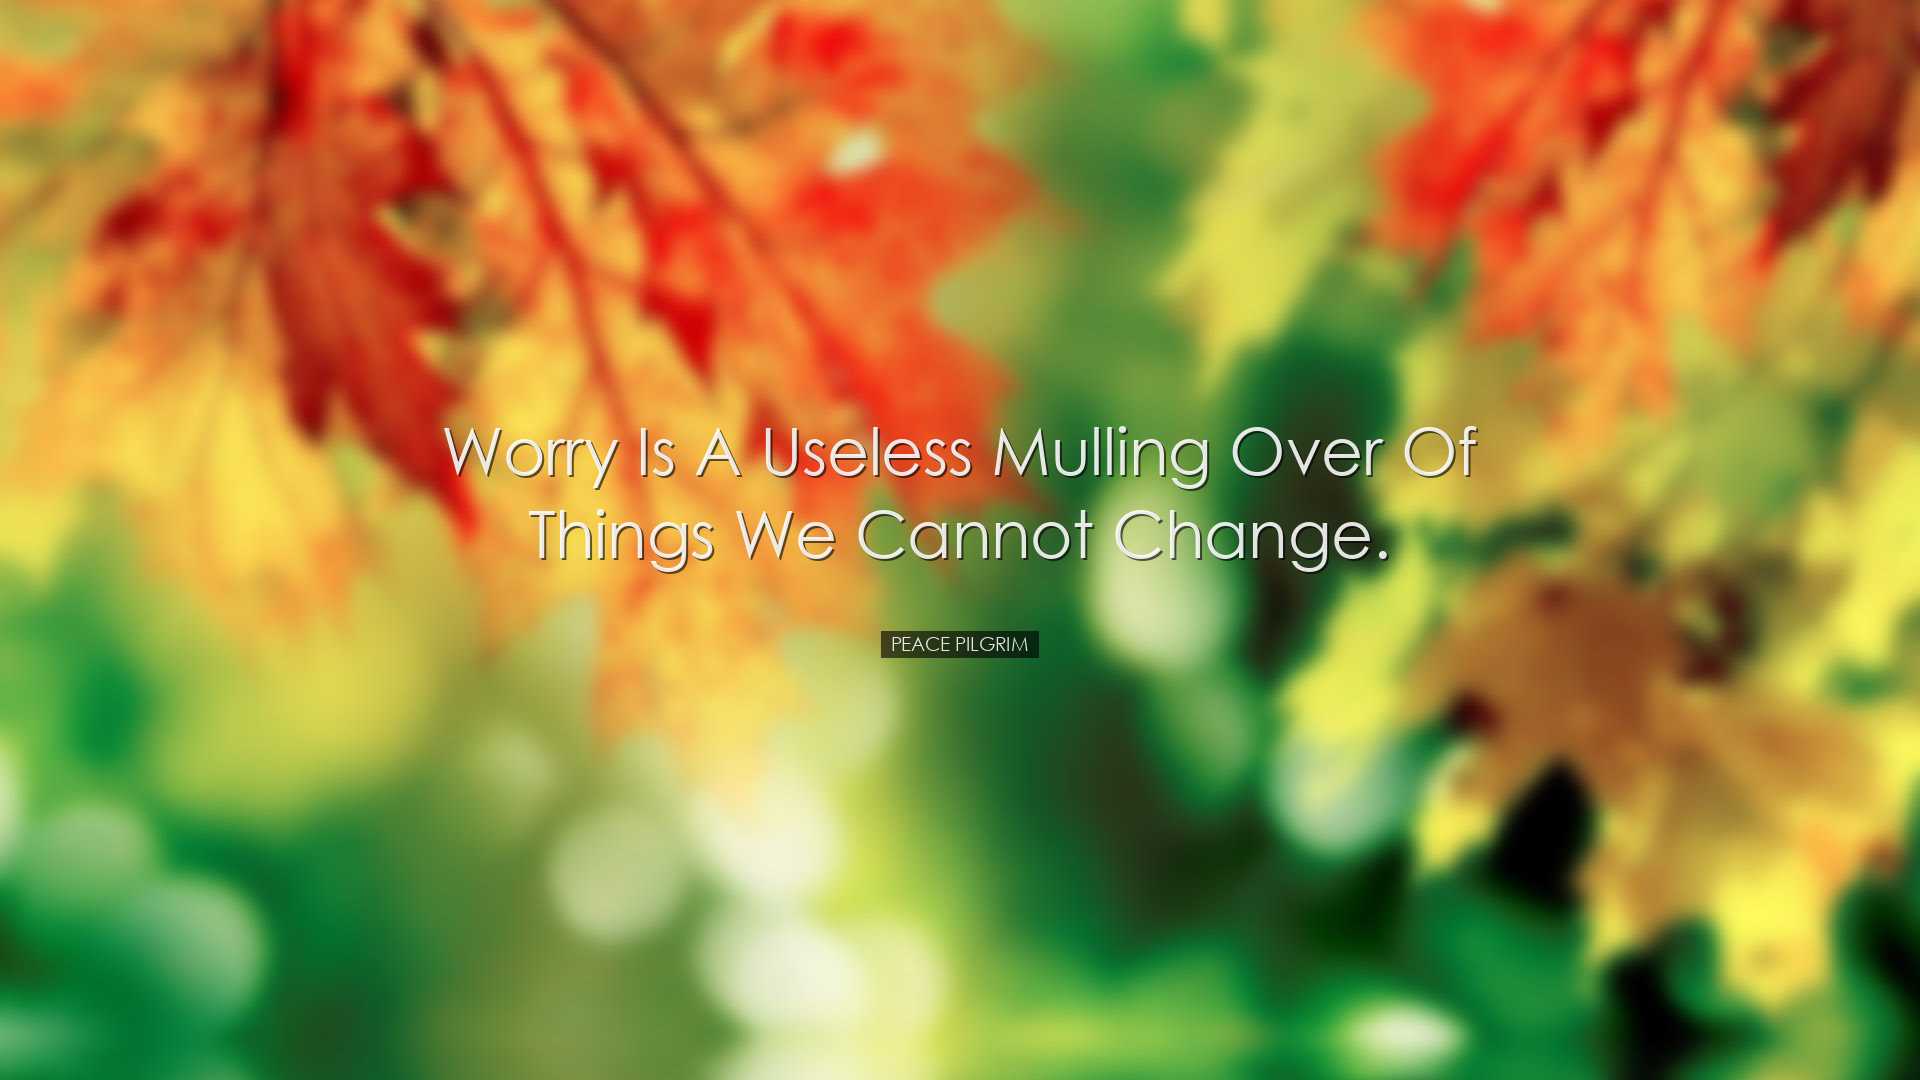 Worry is a useless mulling over of things we cannot change. - Peac